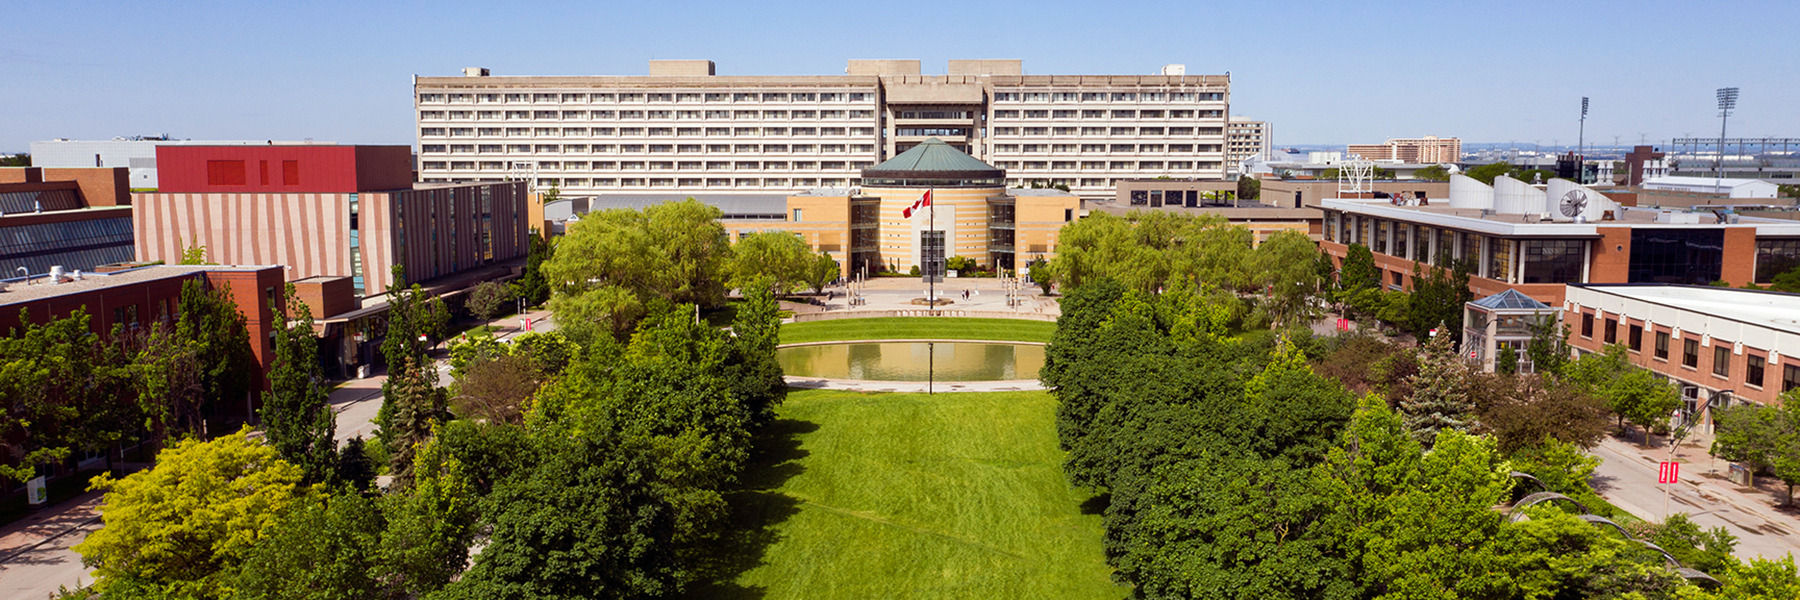 Featured image VARI Hall drone image of the commons and Ross Building